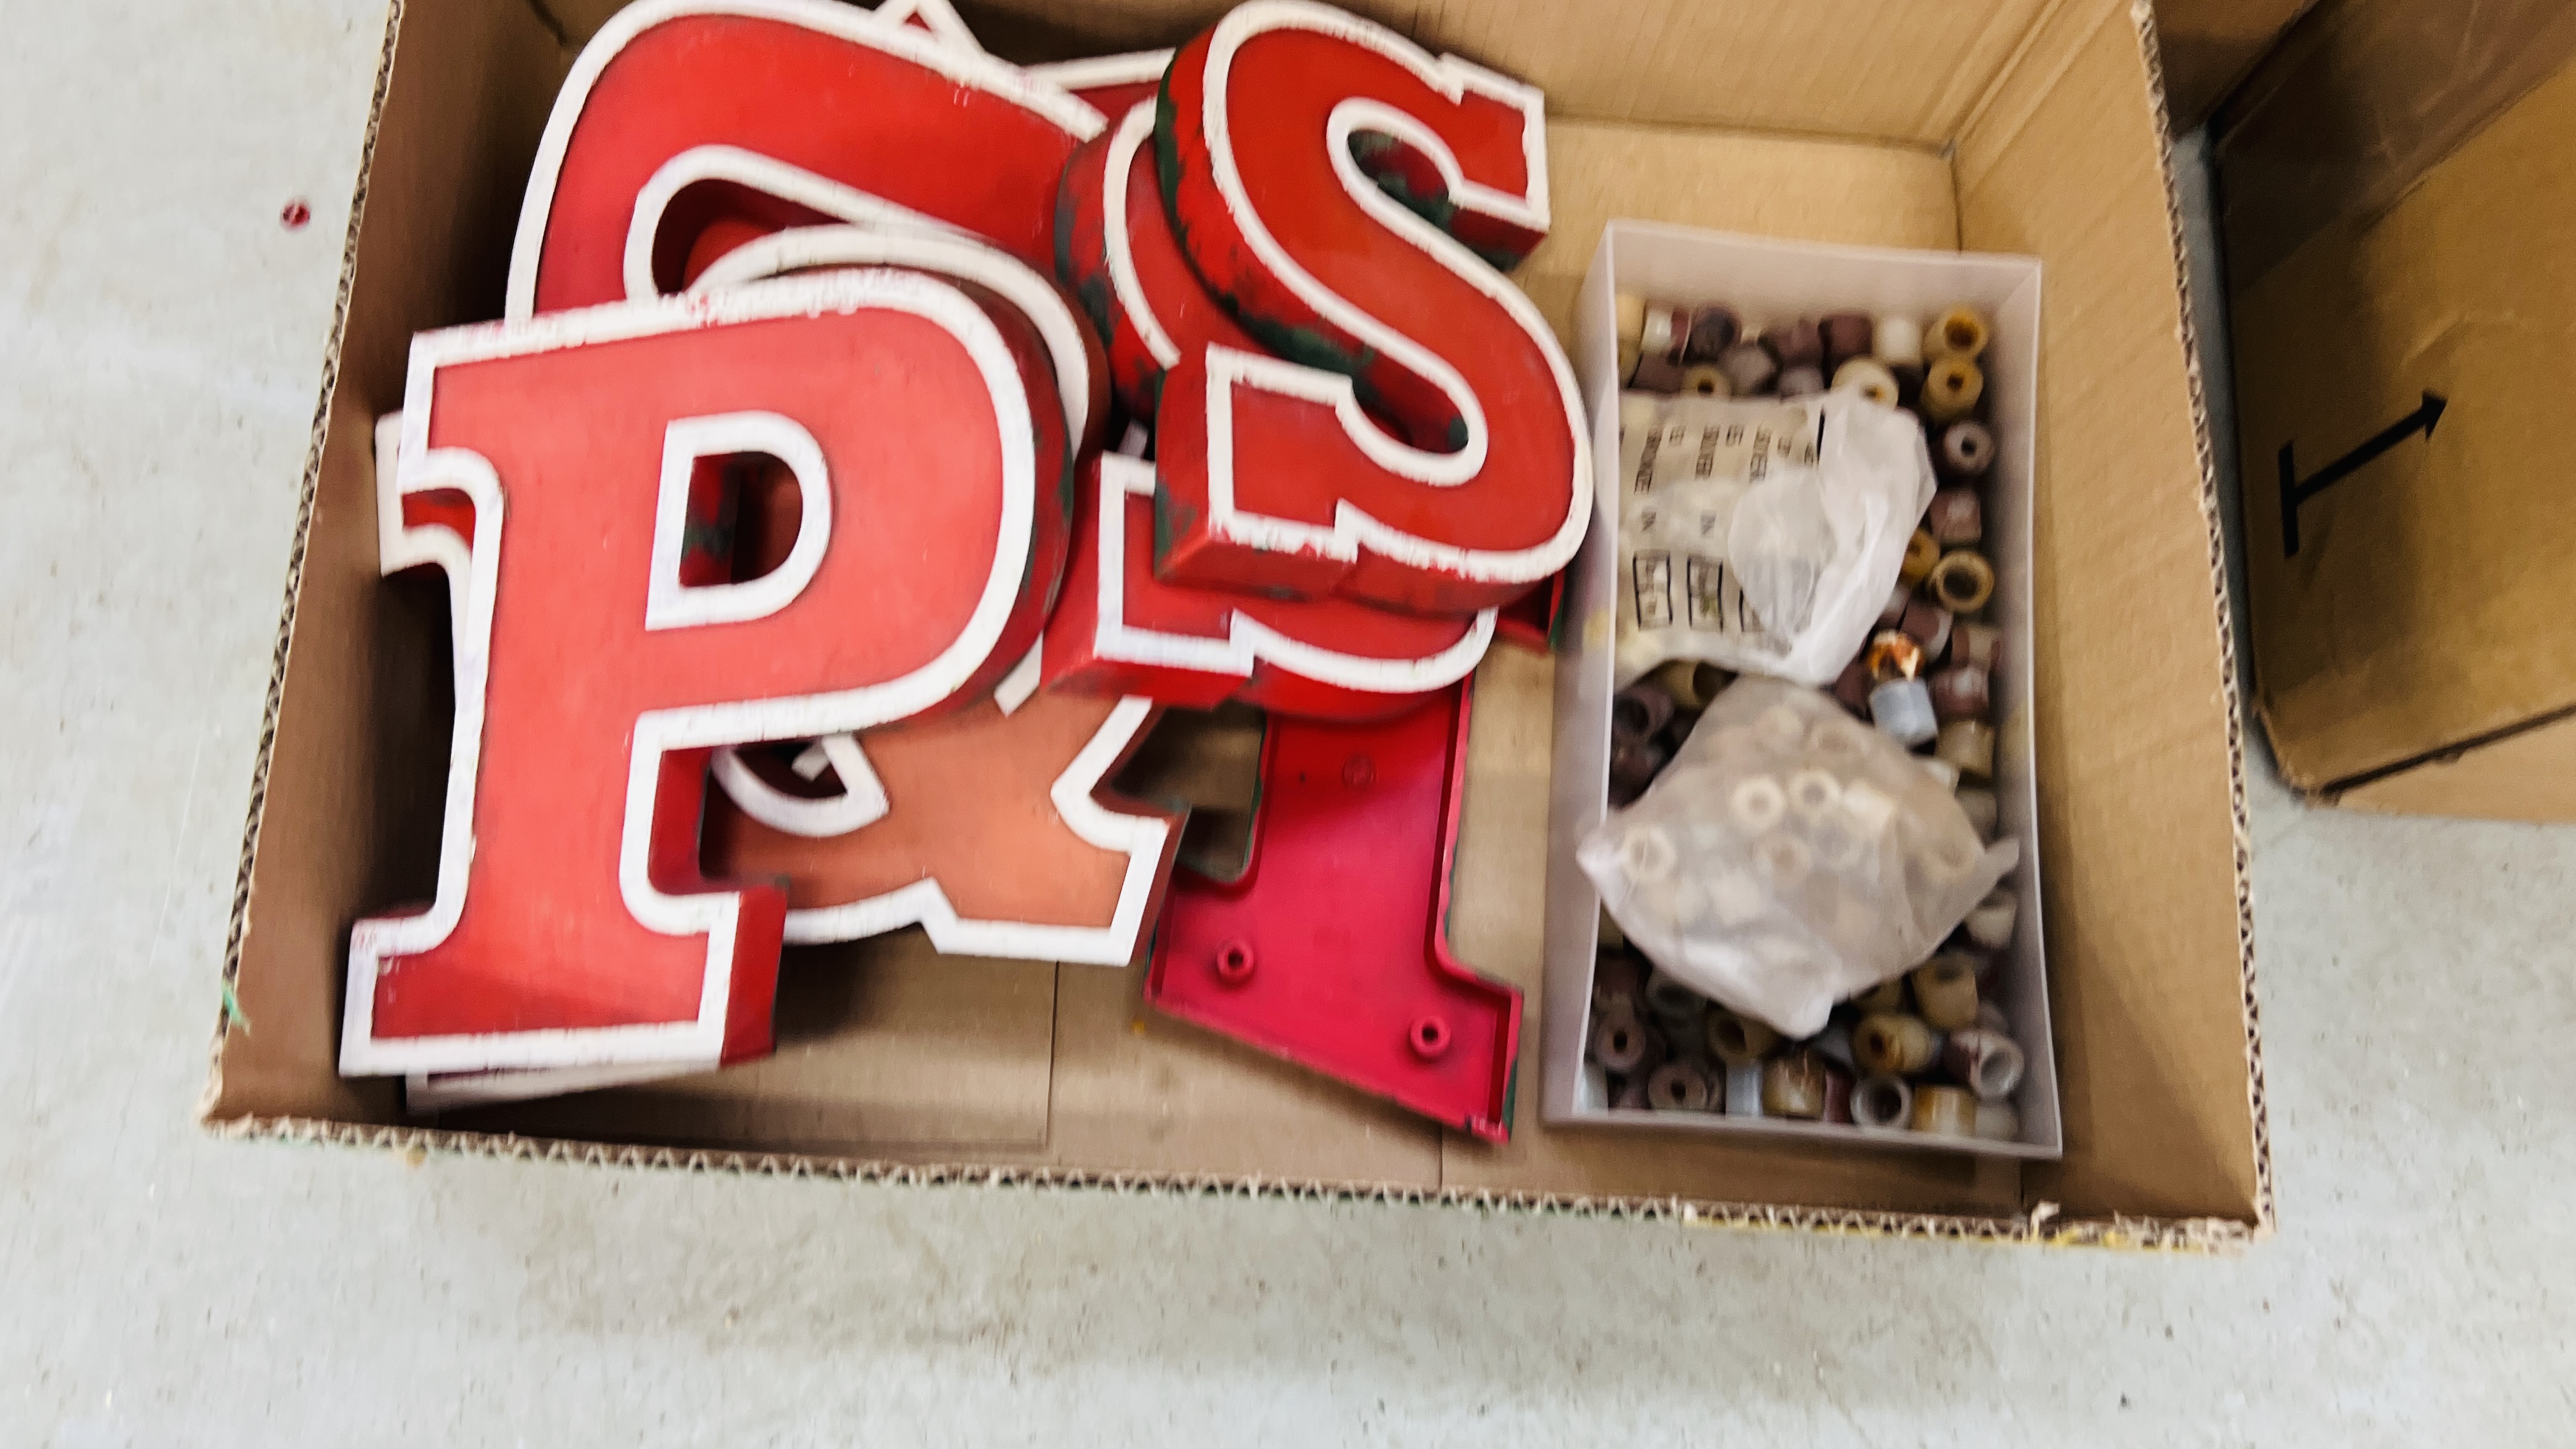 A QUANTITY OF 120 VINTAGE SIGNAGE LETTERING (LARGEST CHARACTER HEIGHT 30. - Image 5 of 7